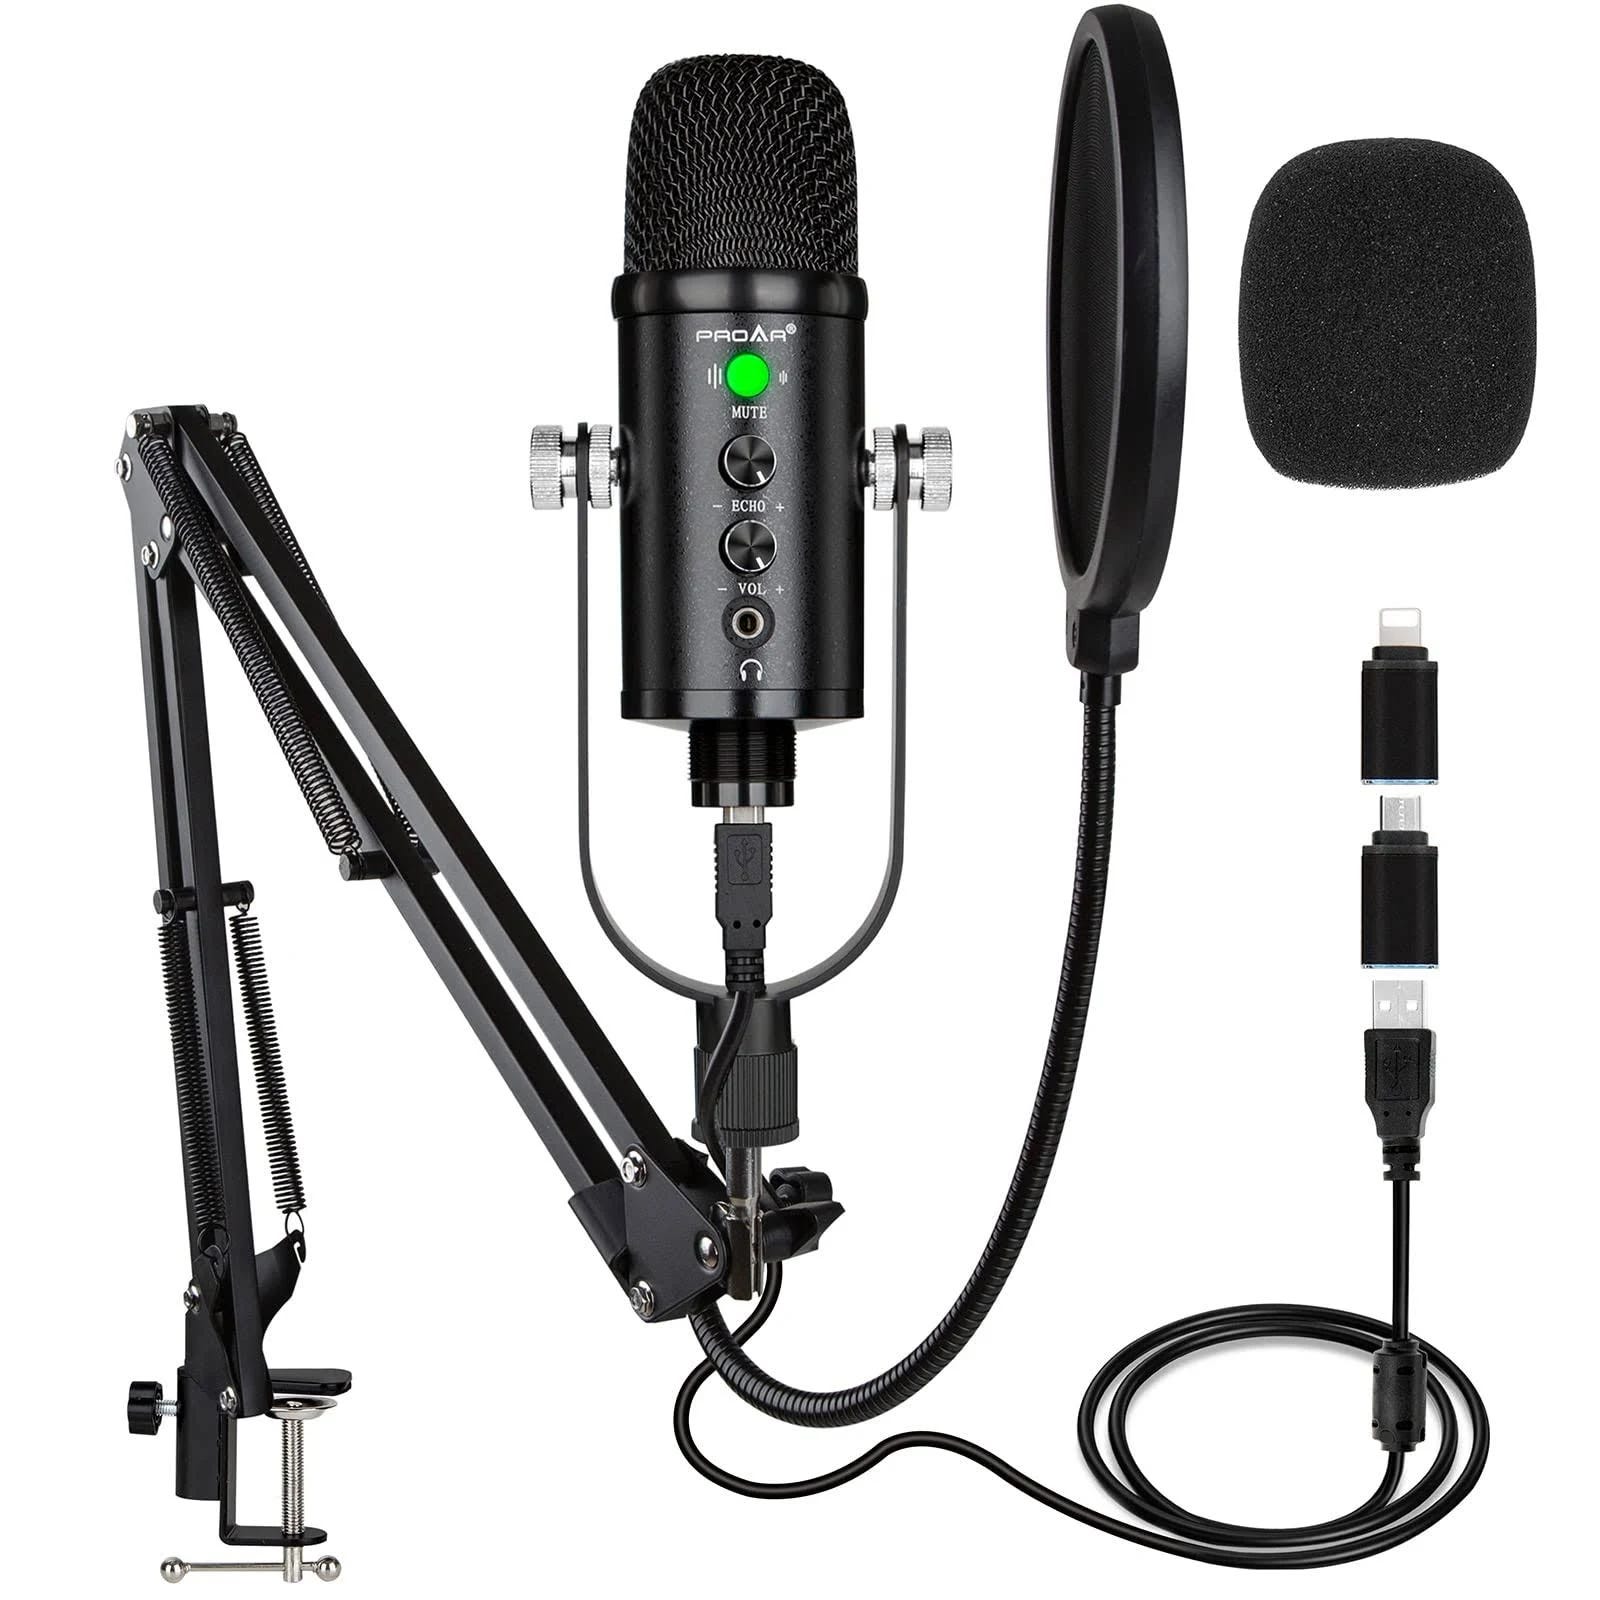 Feature-Rich USB Condenser Microphone for Gaming, Podcasting, and ASMR | Image